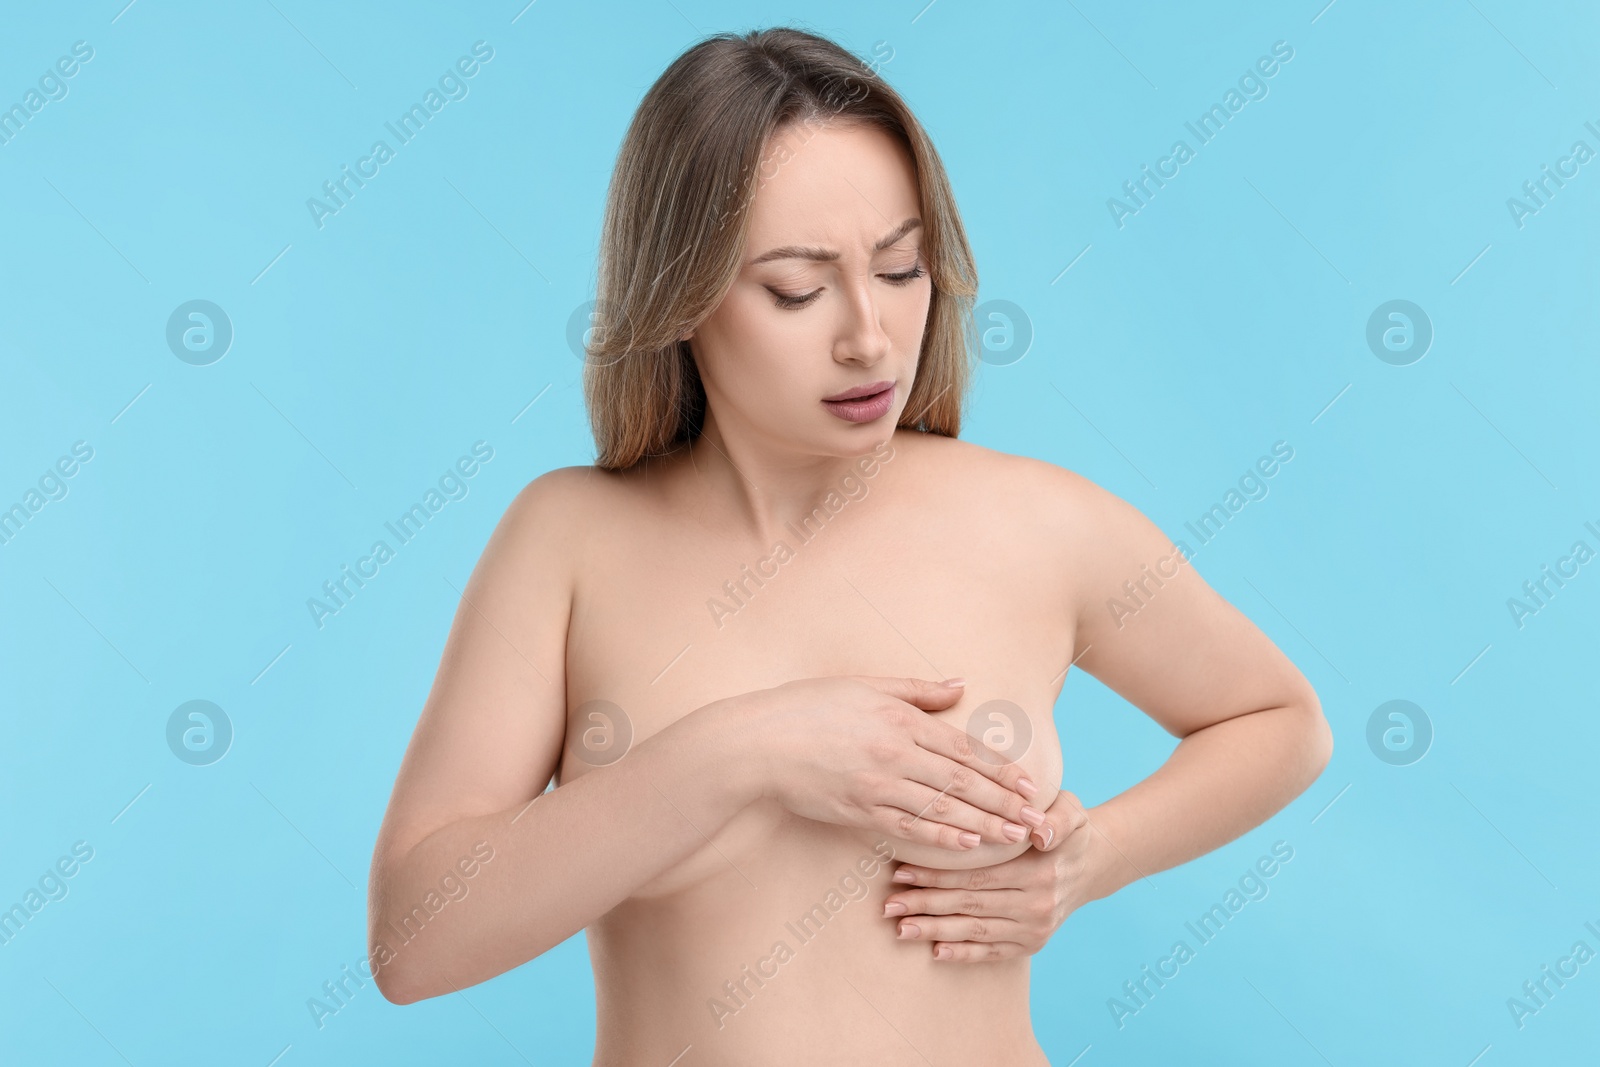 Photo of Mammology. Naked young woman doing breast self-examination on light blue background